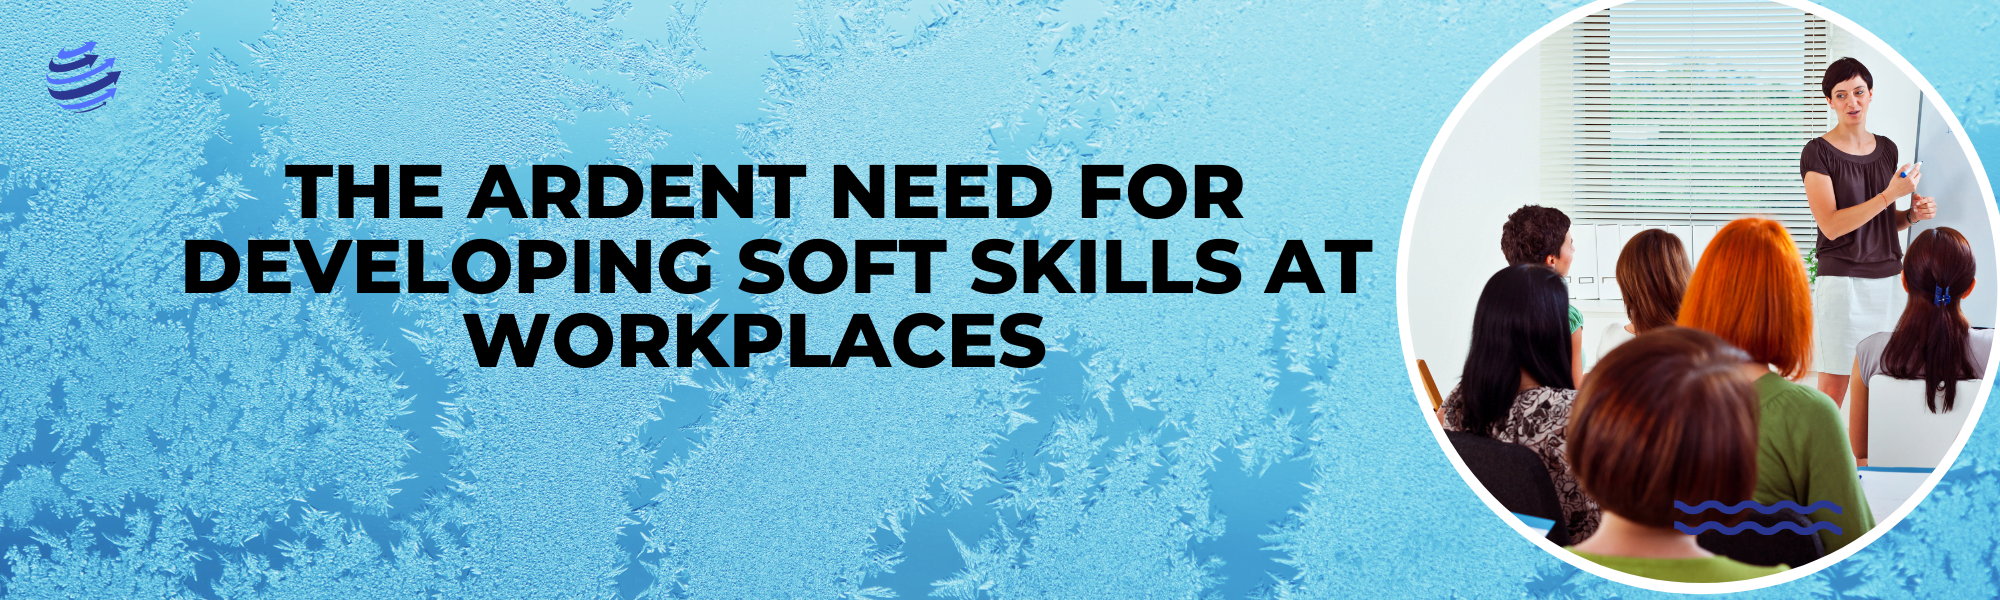 The Ardent Need For Developing Soft Skills at Workplace